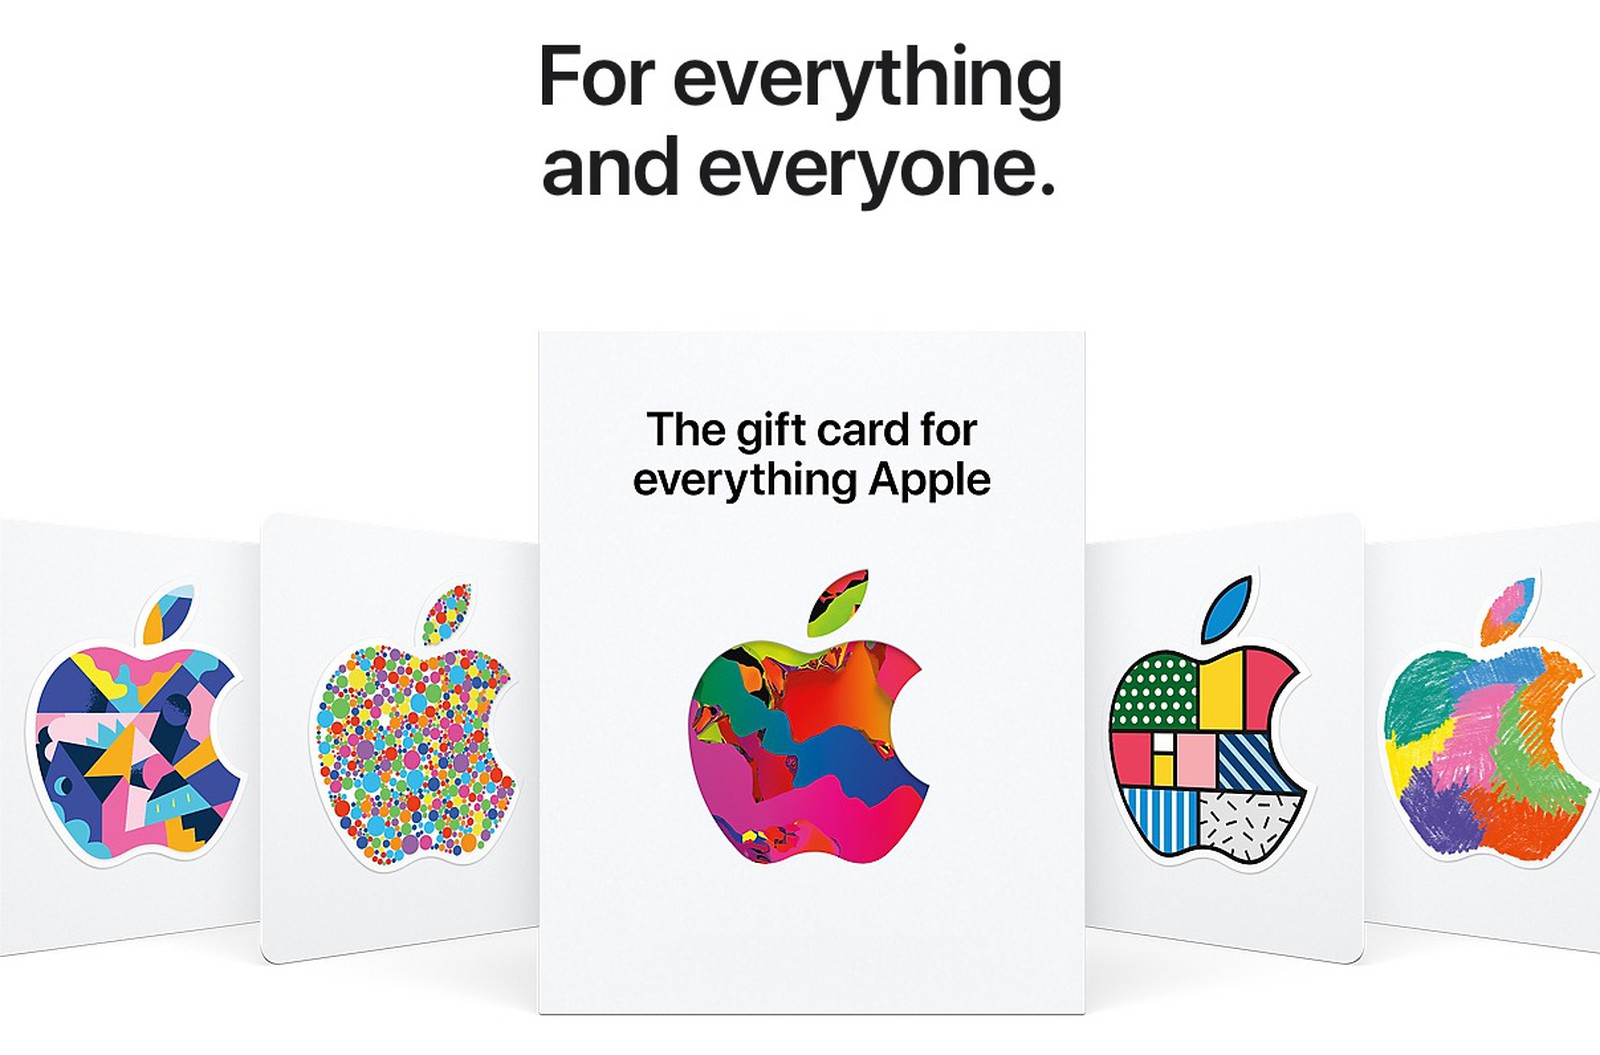 Apple Launches New Gift Card for 'Everything Apple' MacRumors